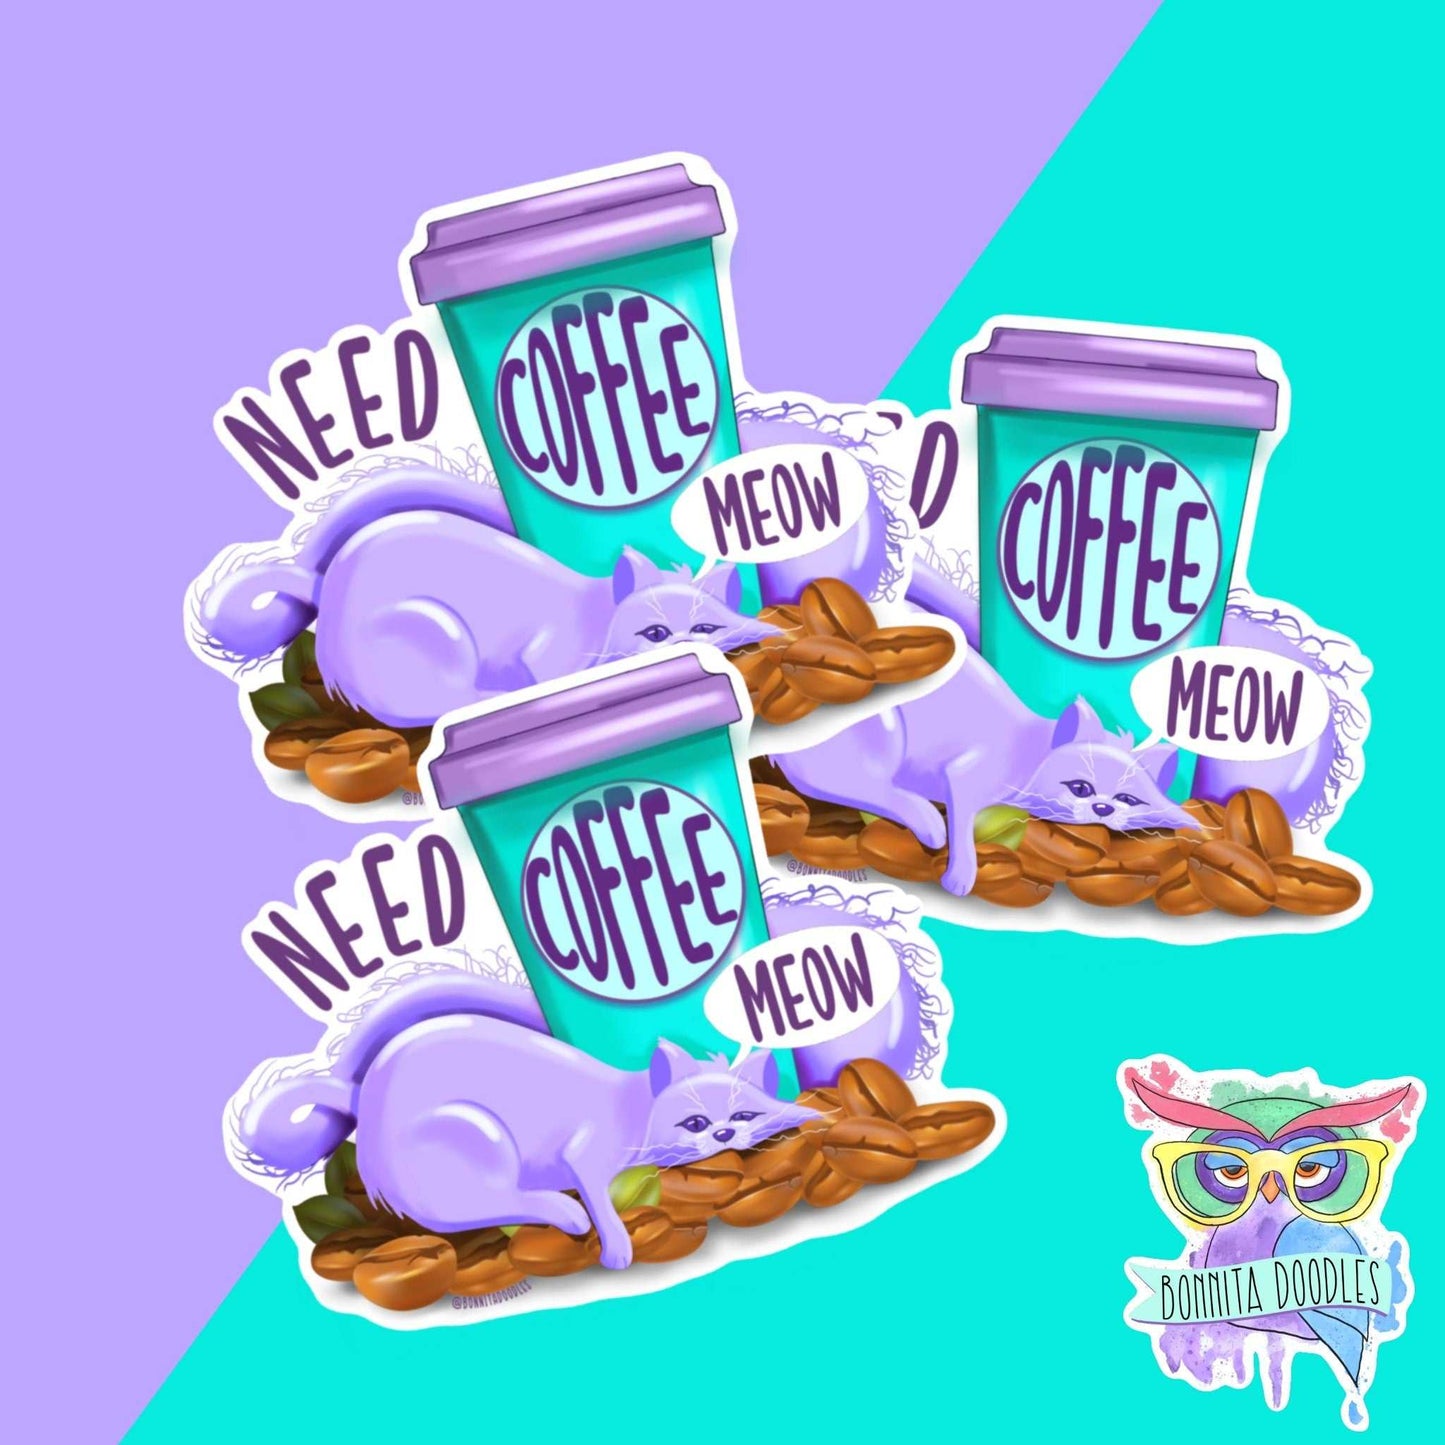 Need coffee meow - cat quote sticker or print